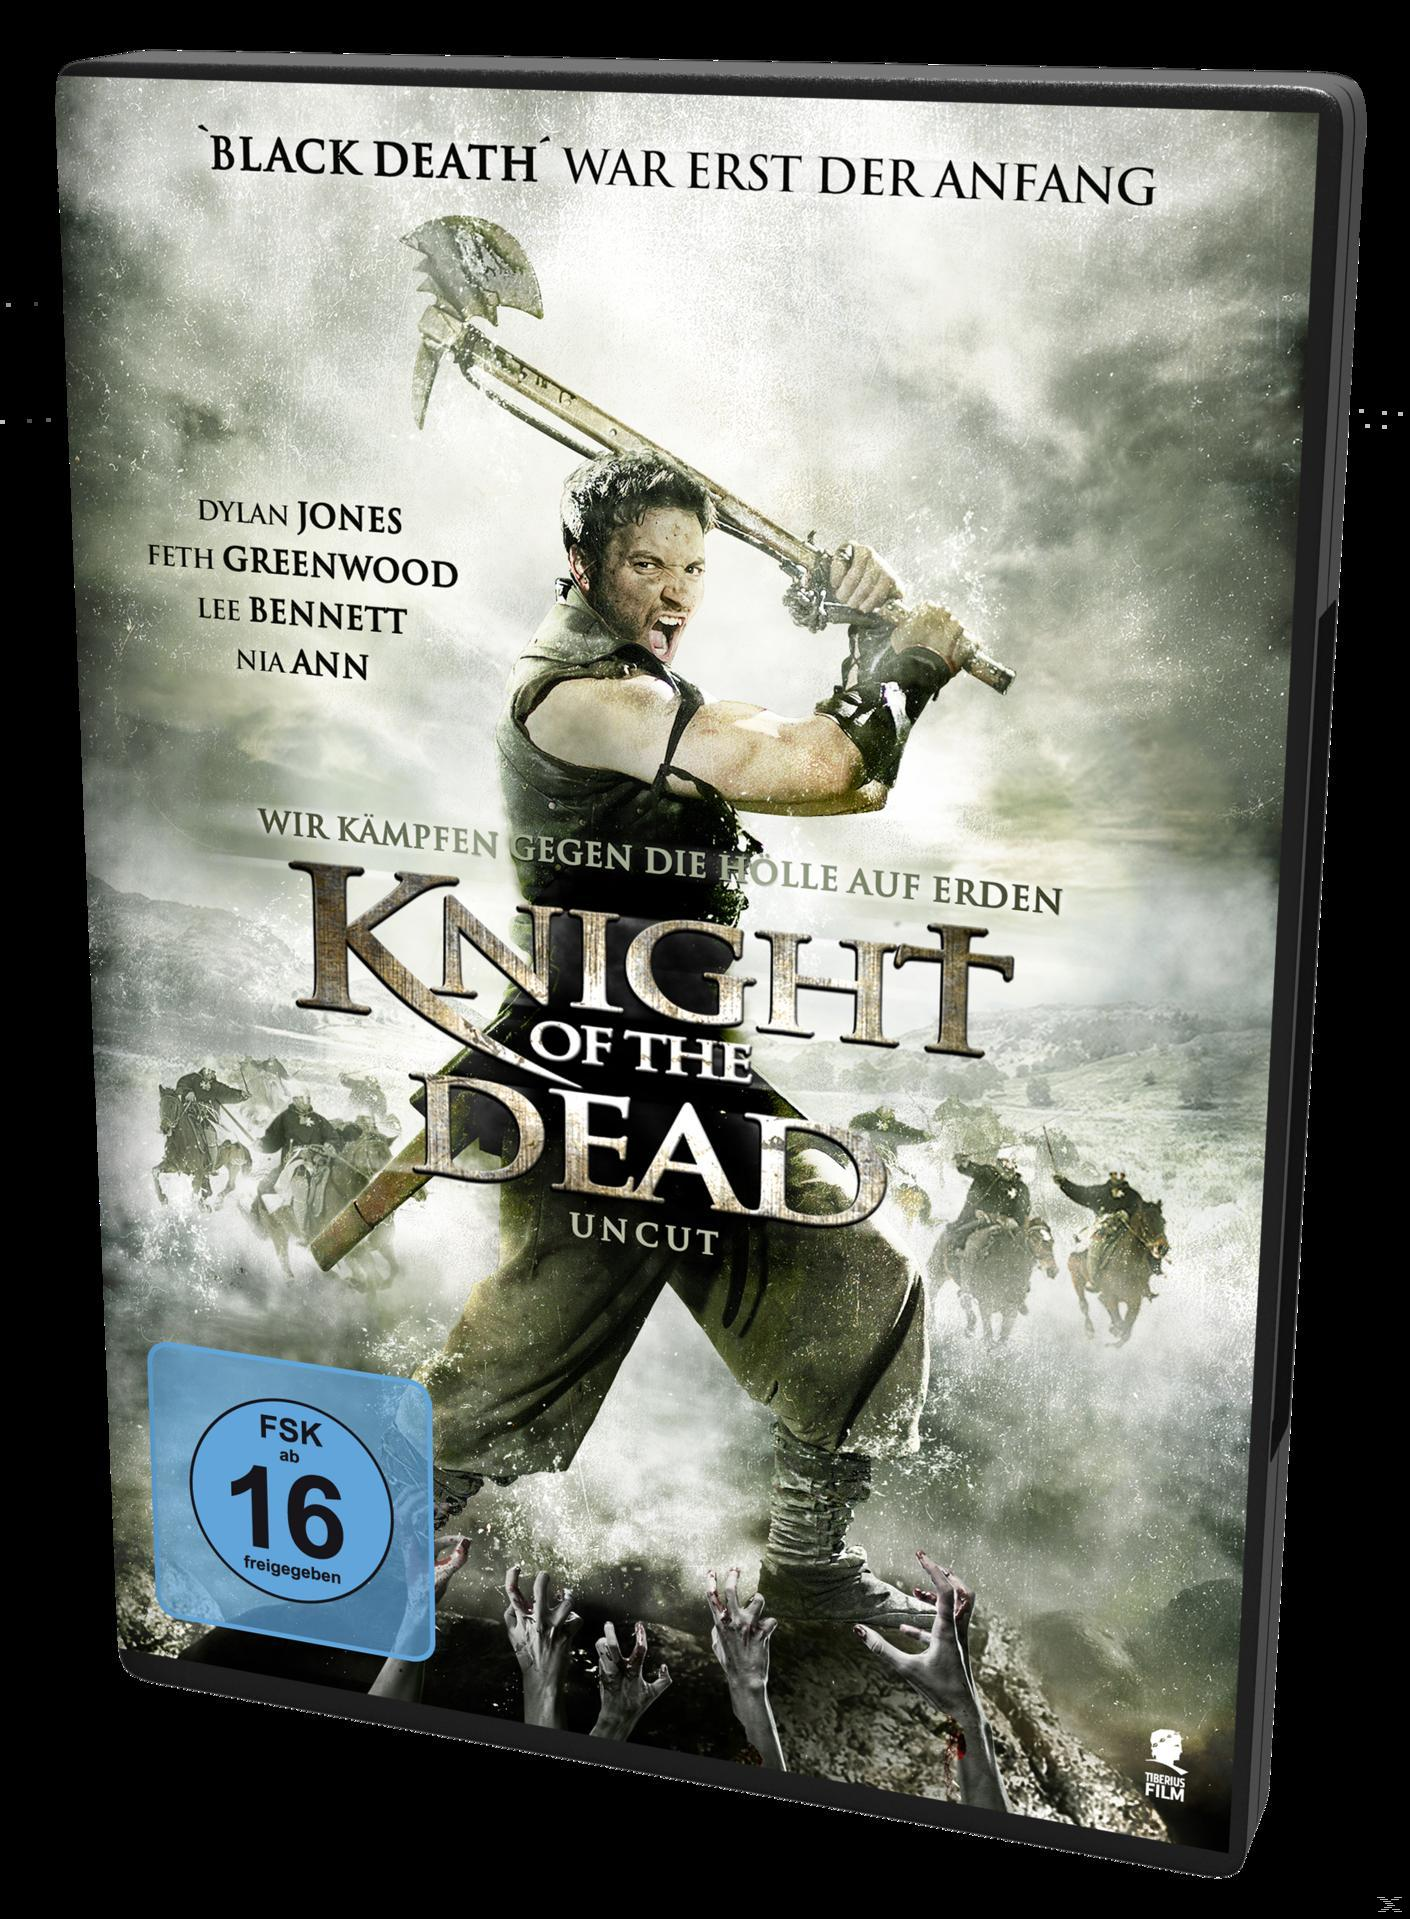 Knight of the Dead DVD